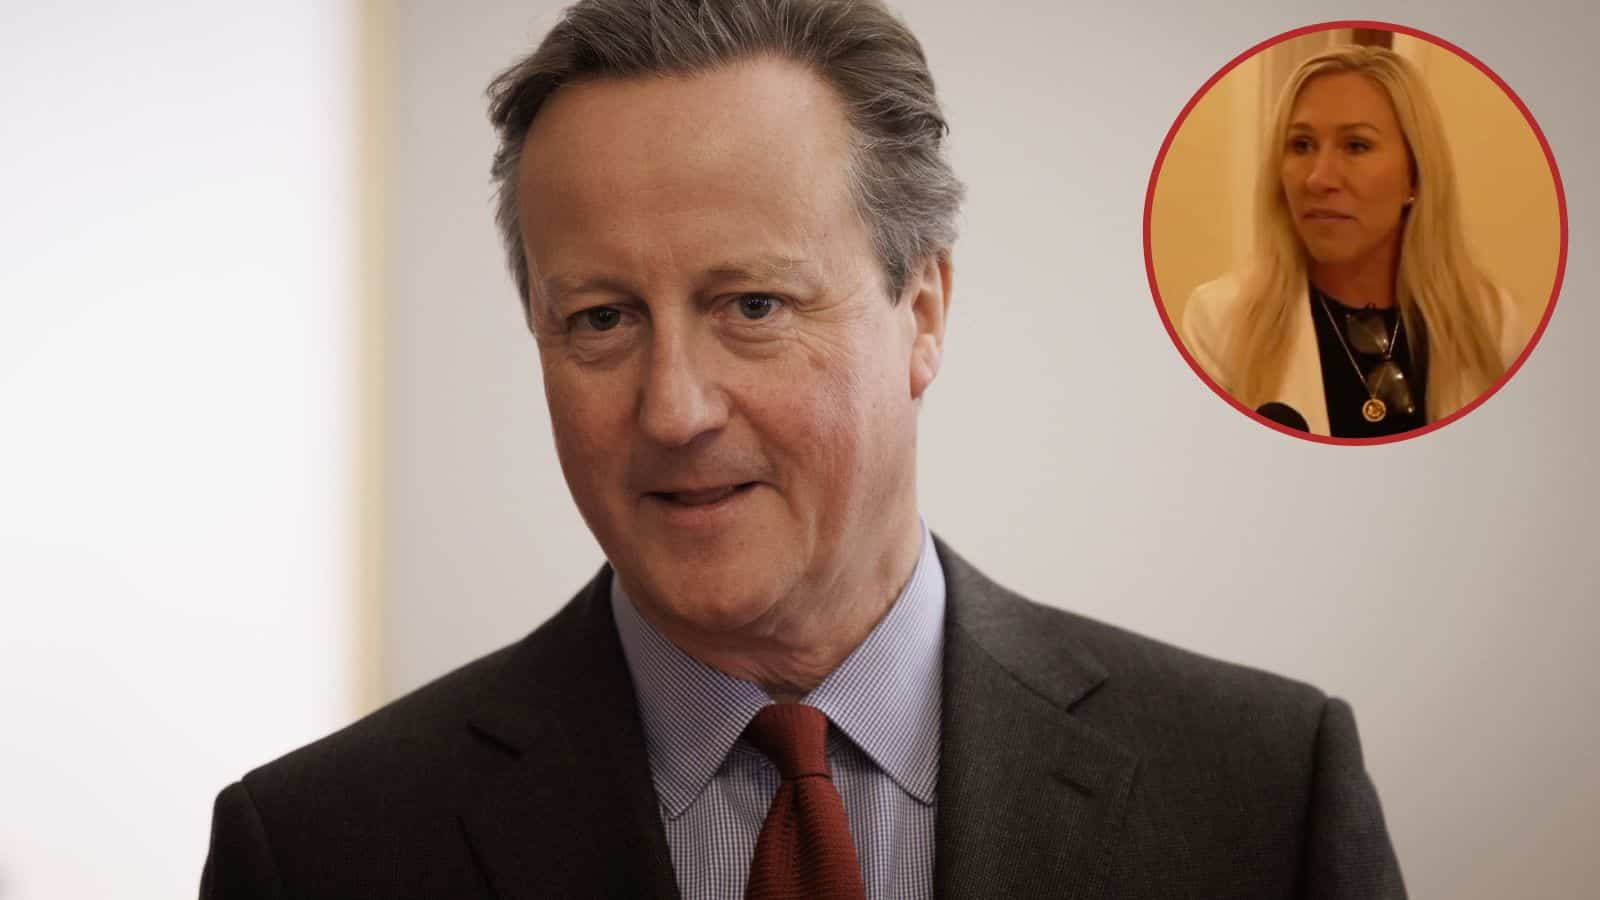 Republican right-winger tells Cameron to ‘kiss her ass’ after call for Ukraine funding